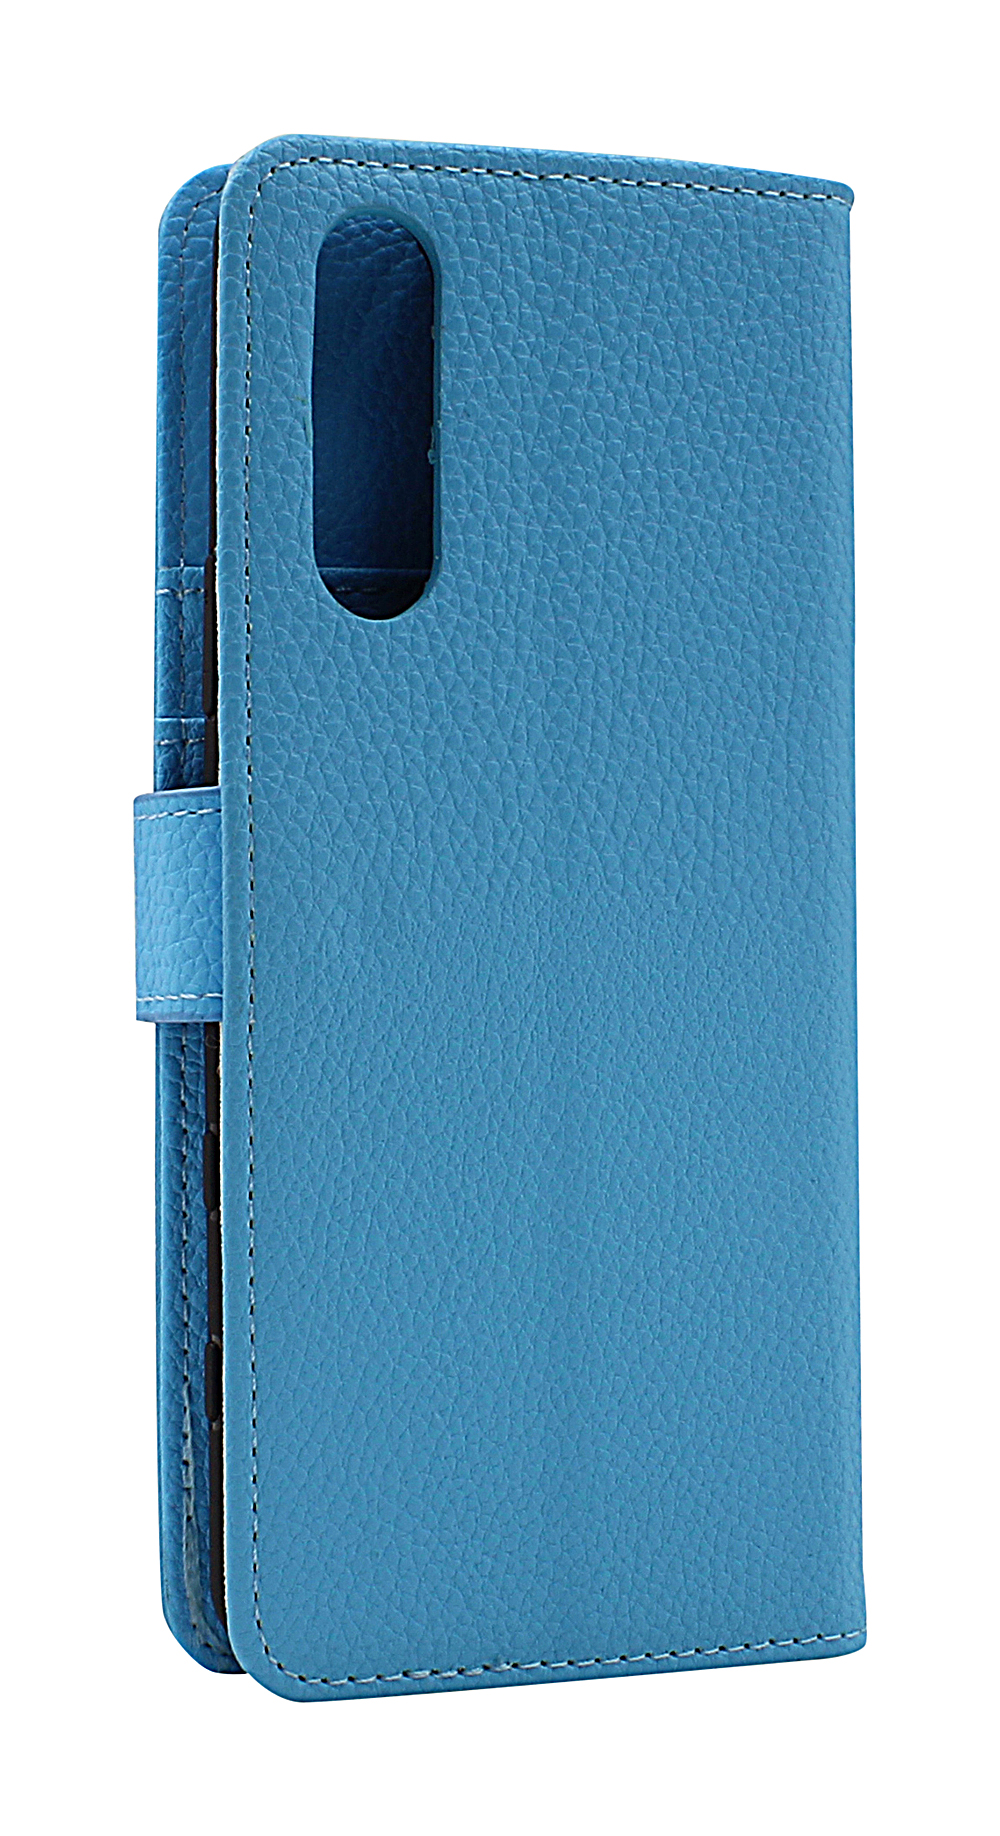 New Standcase Wallet Sony Xperia 5 II (XQ-AS52)